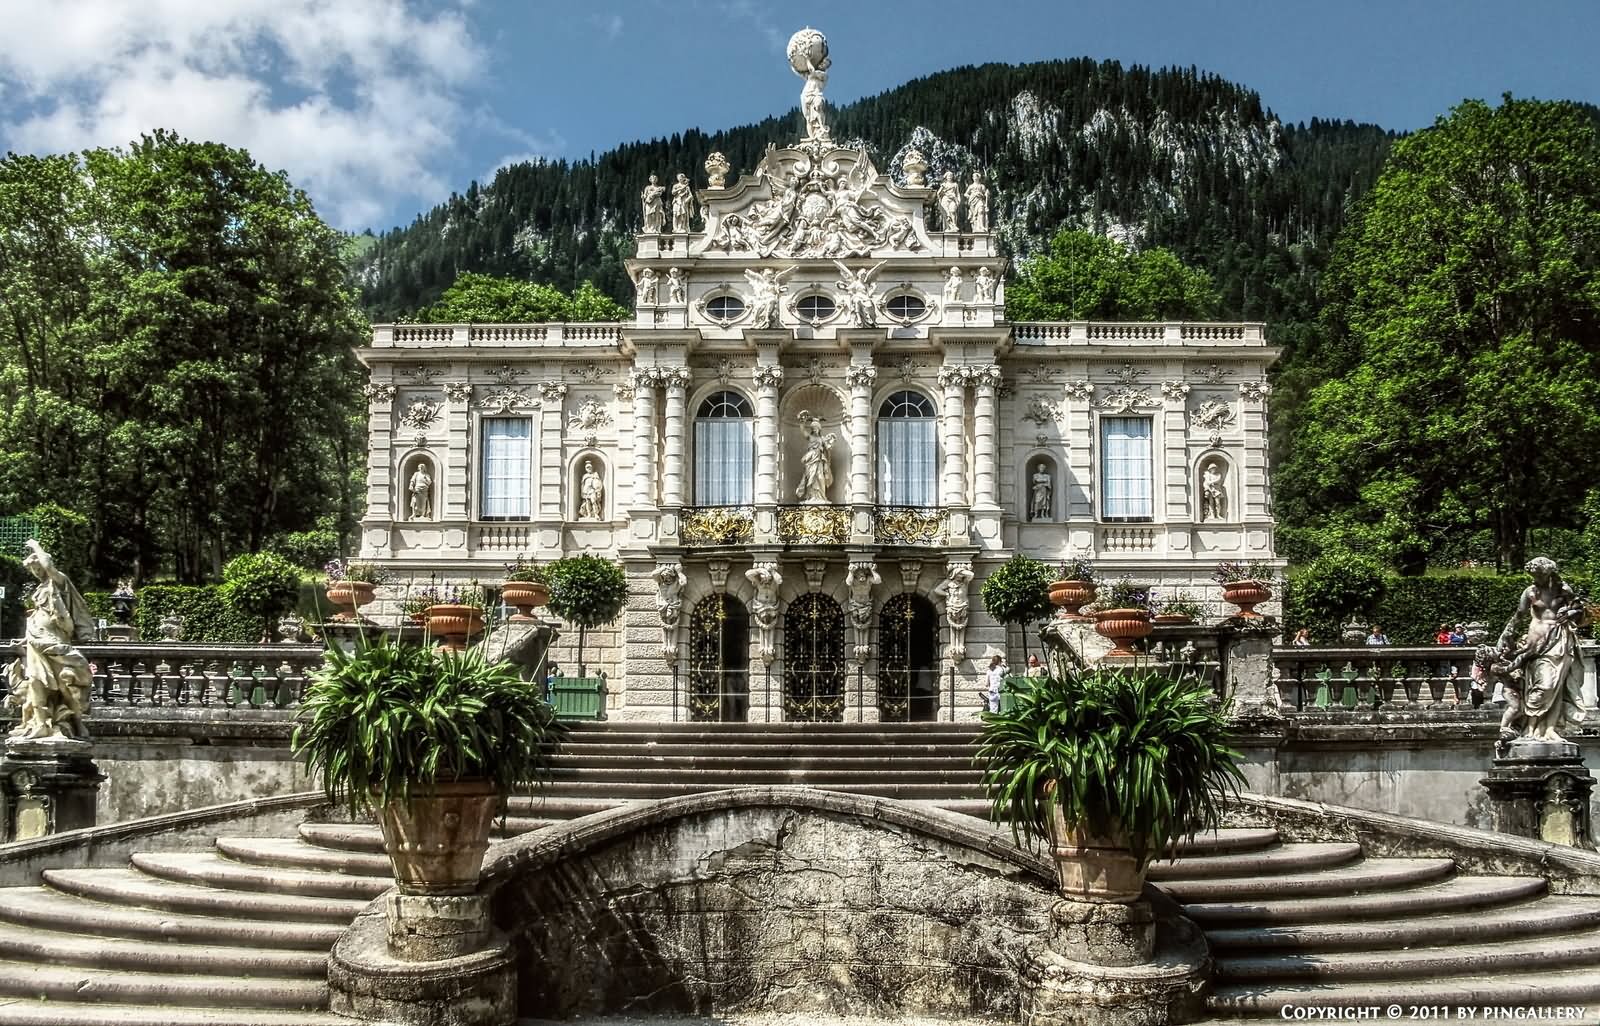 Front View Image Of The Linderhof Palace In Bavaria, Germany